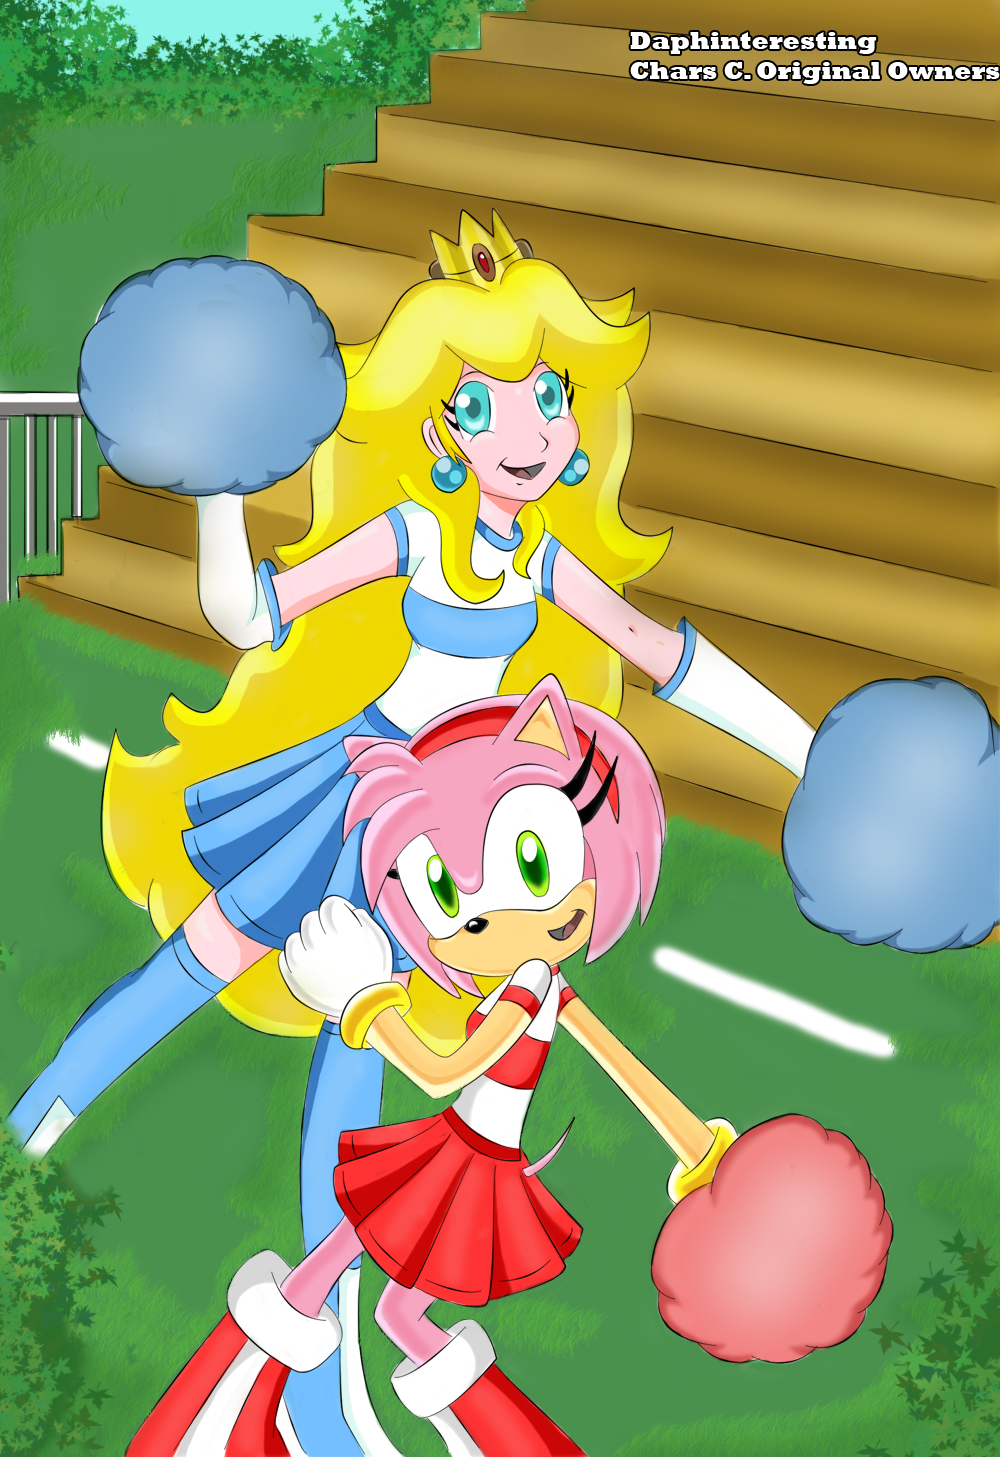 881672-amy_rose_and_princess_peach_by_daphinteresting.png